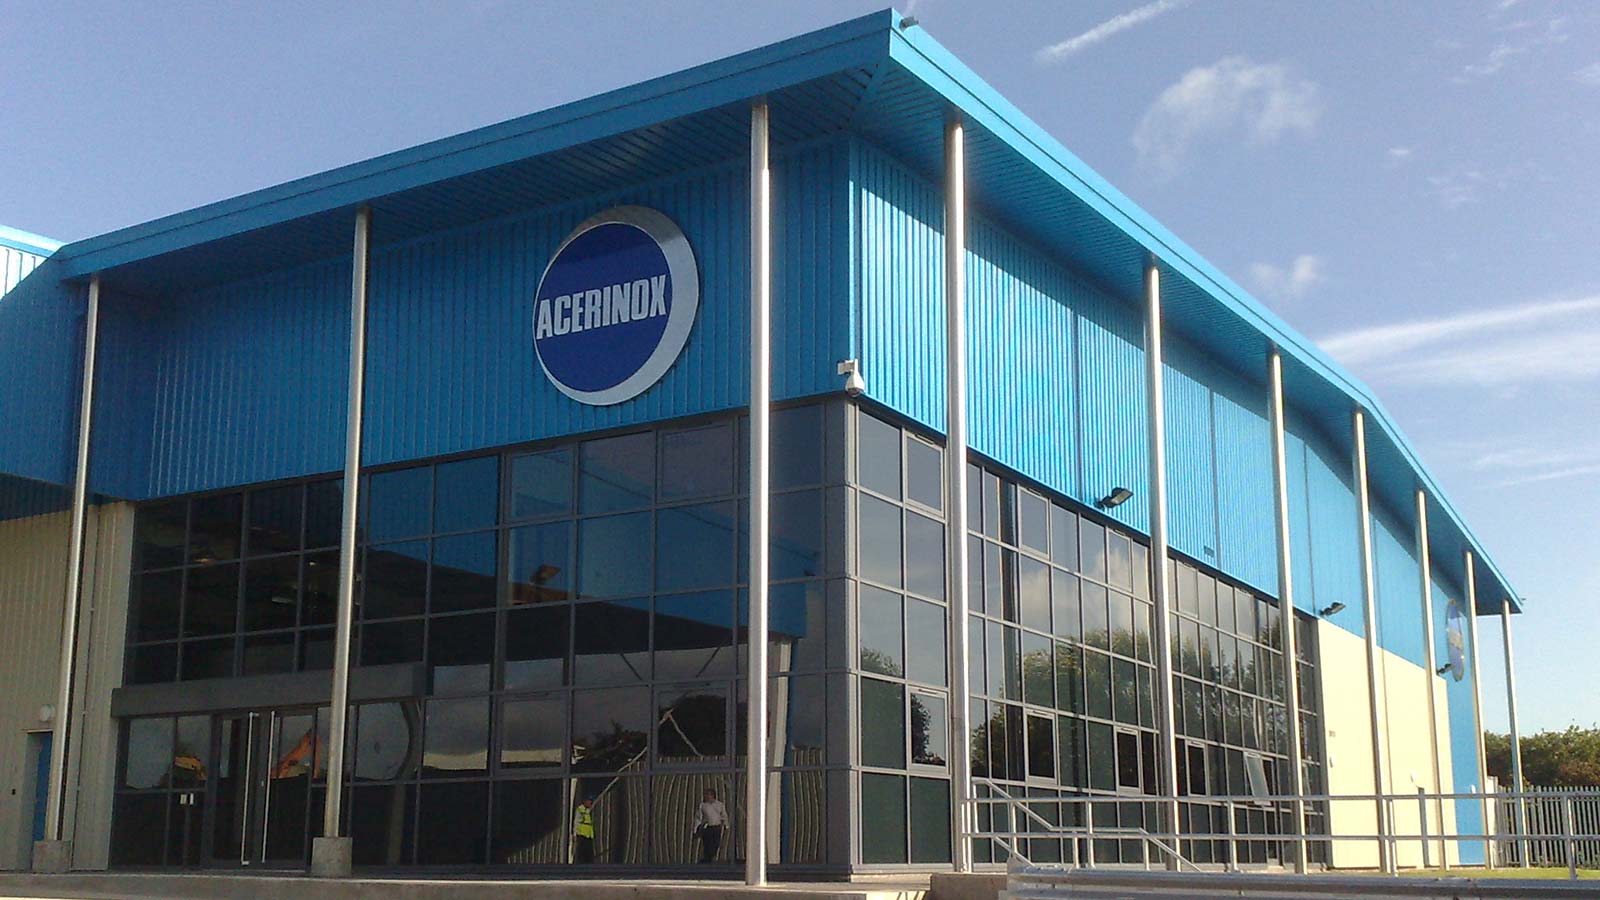 Acerinox warehouse and office space.